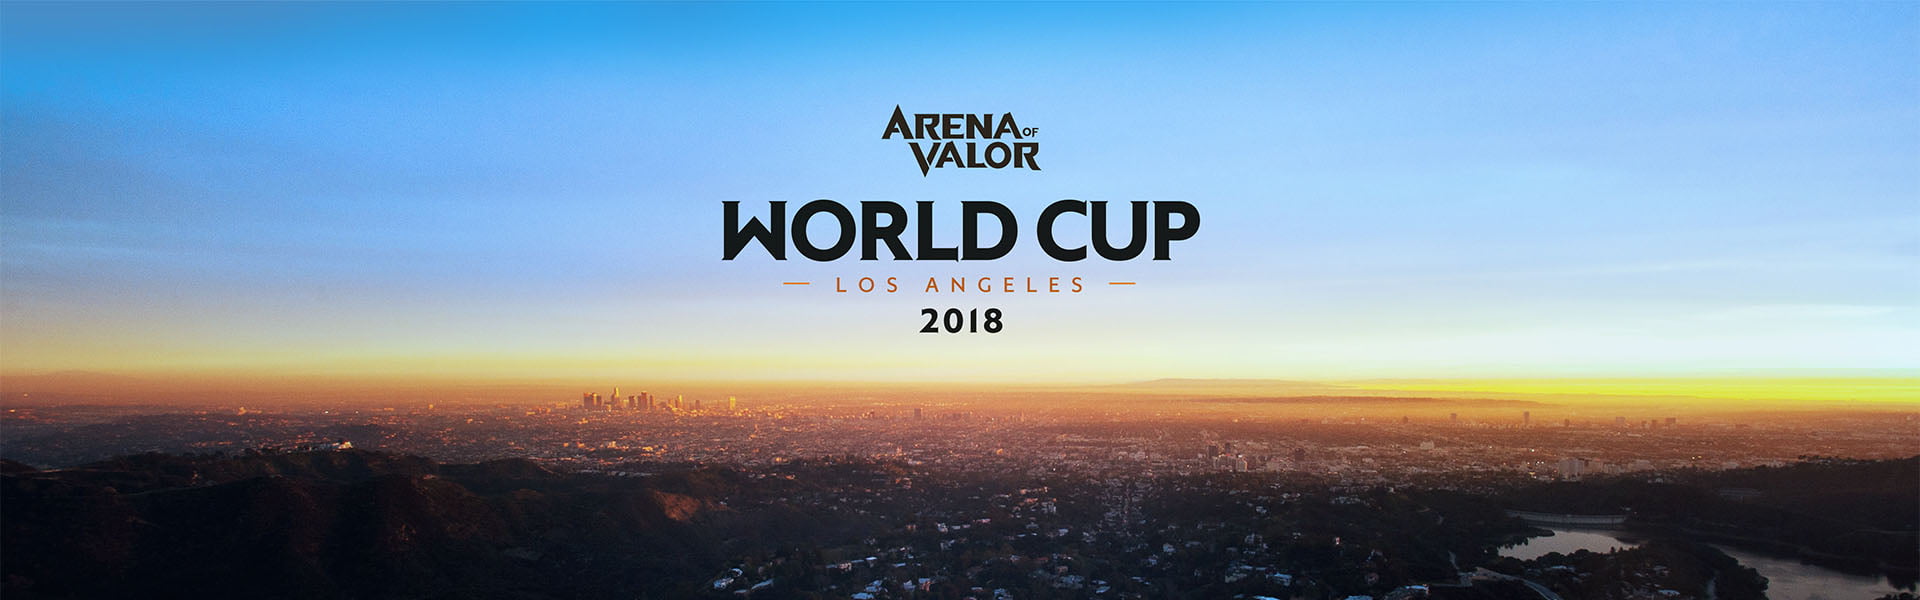 Garena’s Arena of Valor 2018 World Cup Takes the Battle to L.A. this July 14